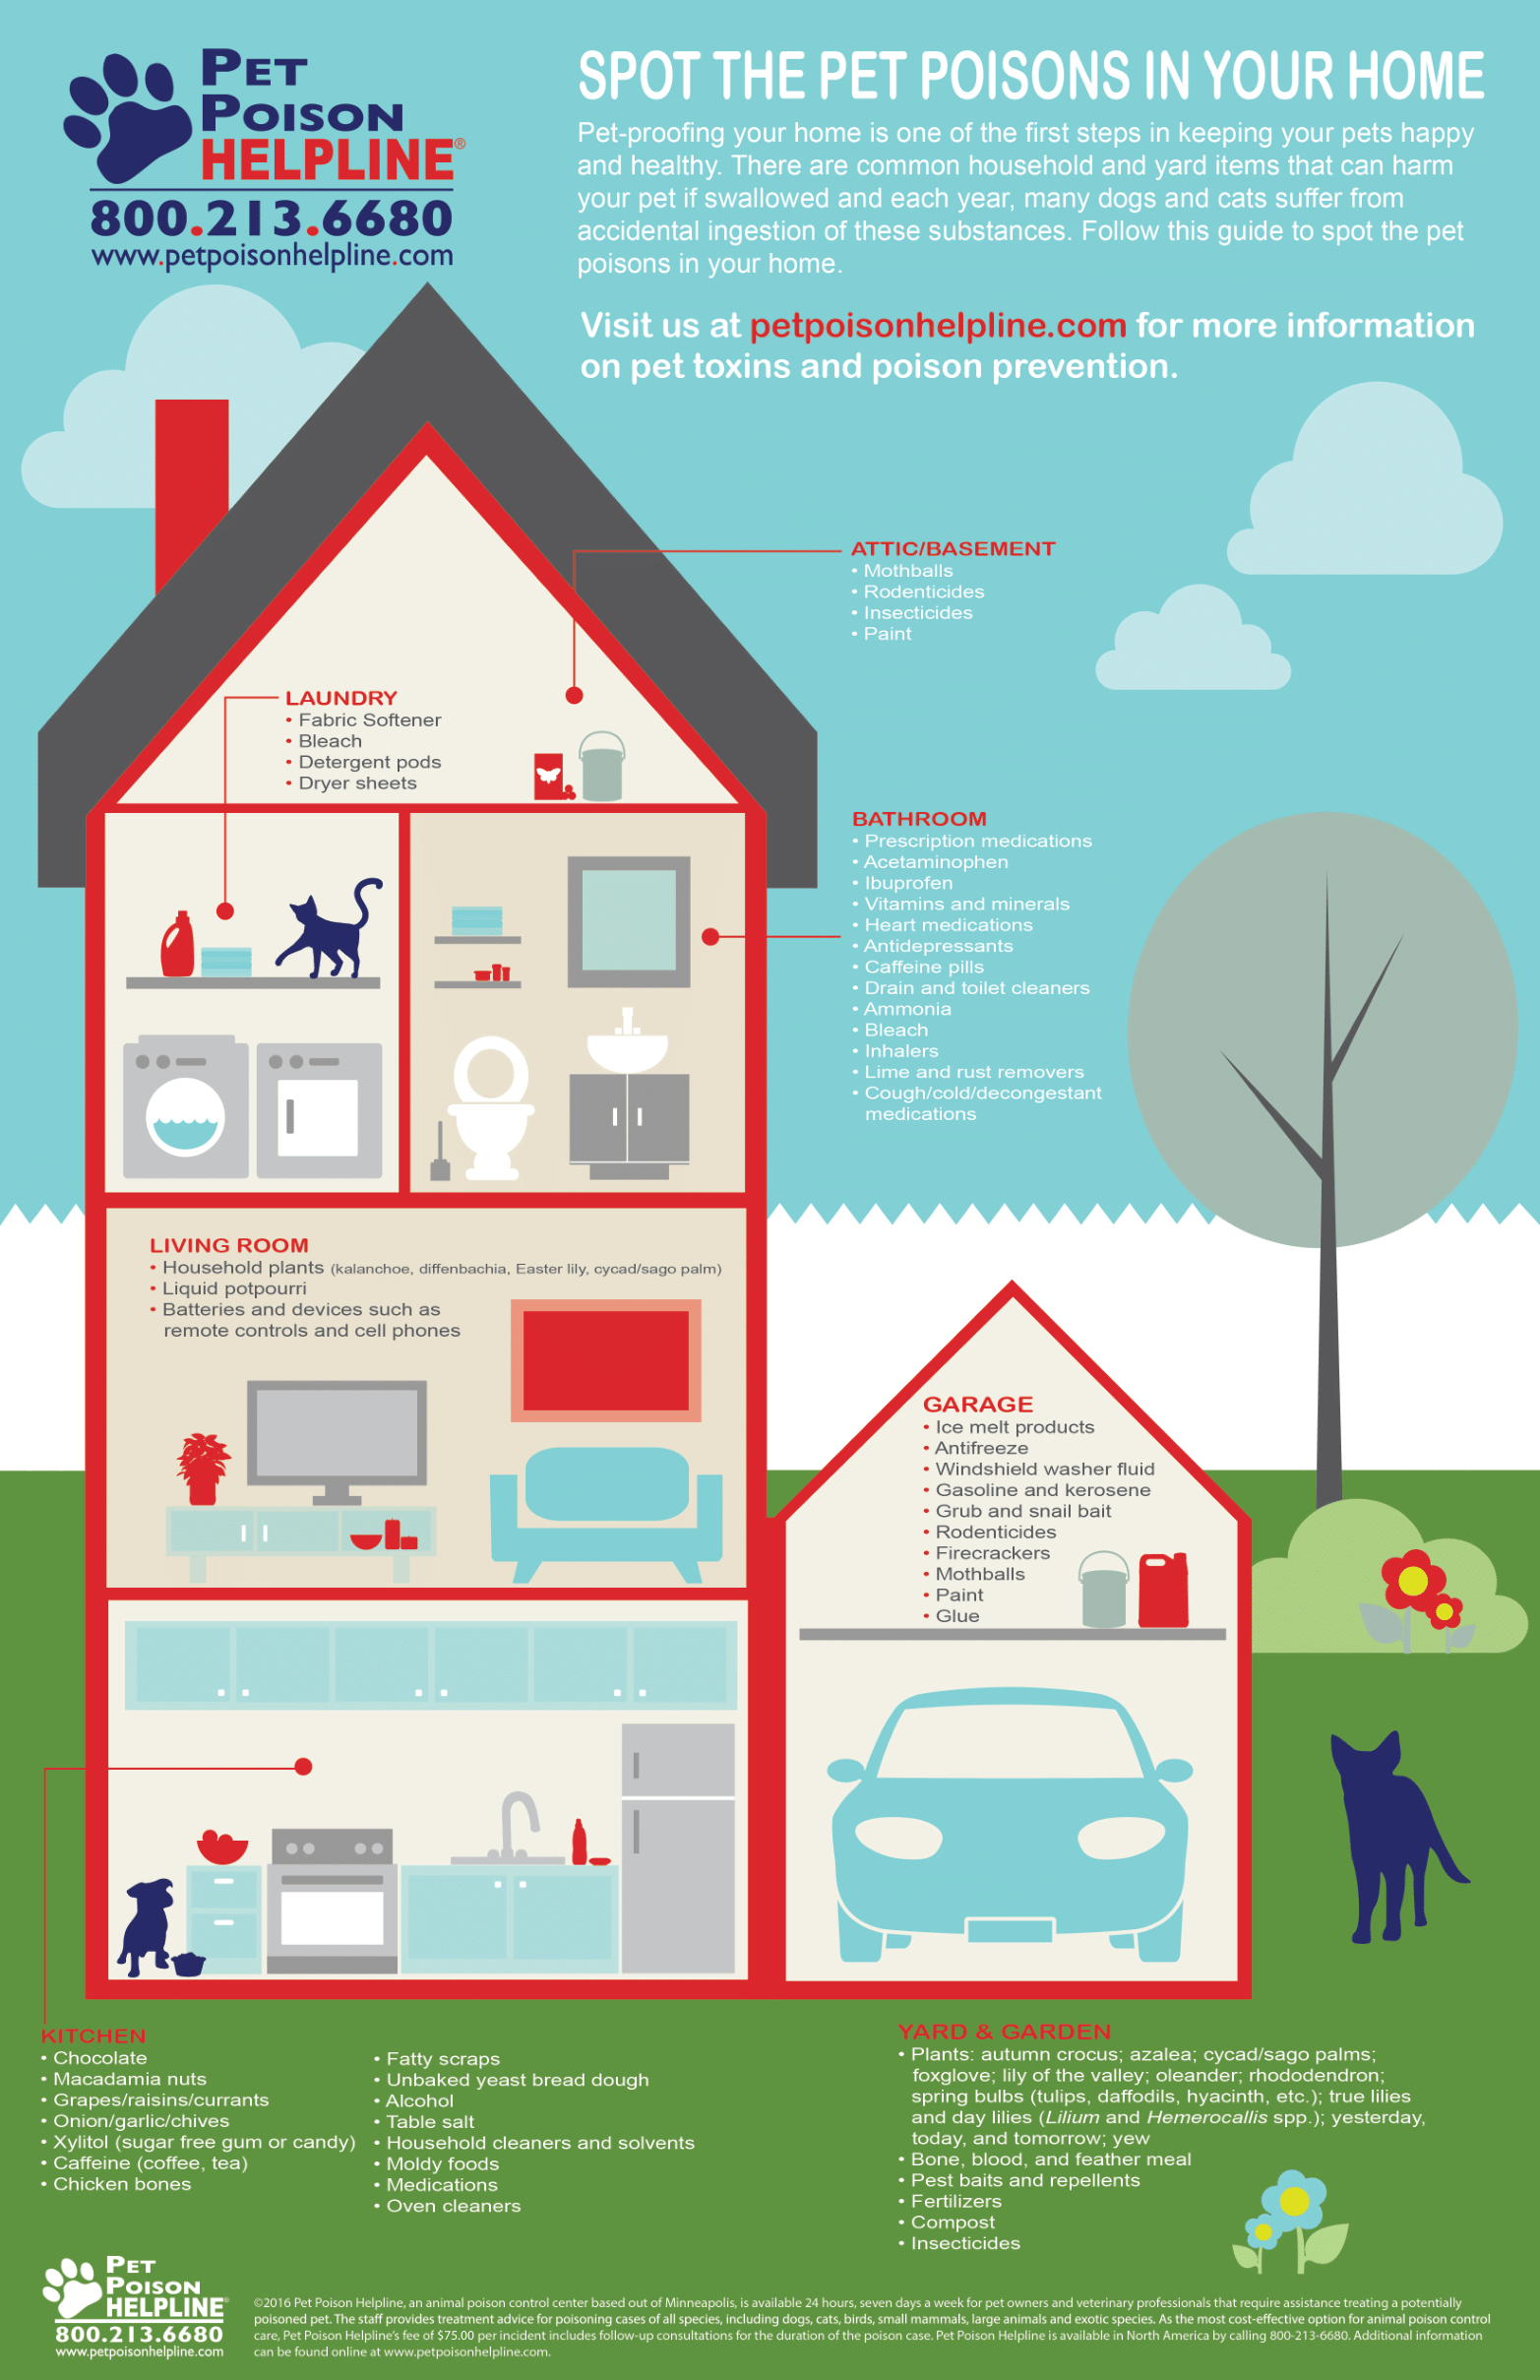 Spot The Pet Poisons In Your Home - Infographic